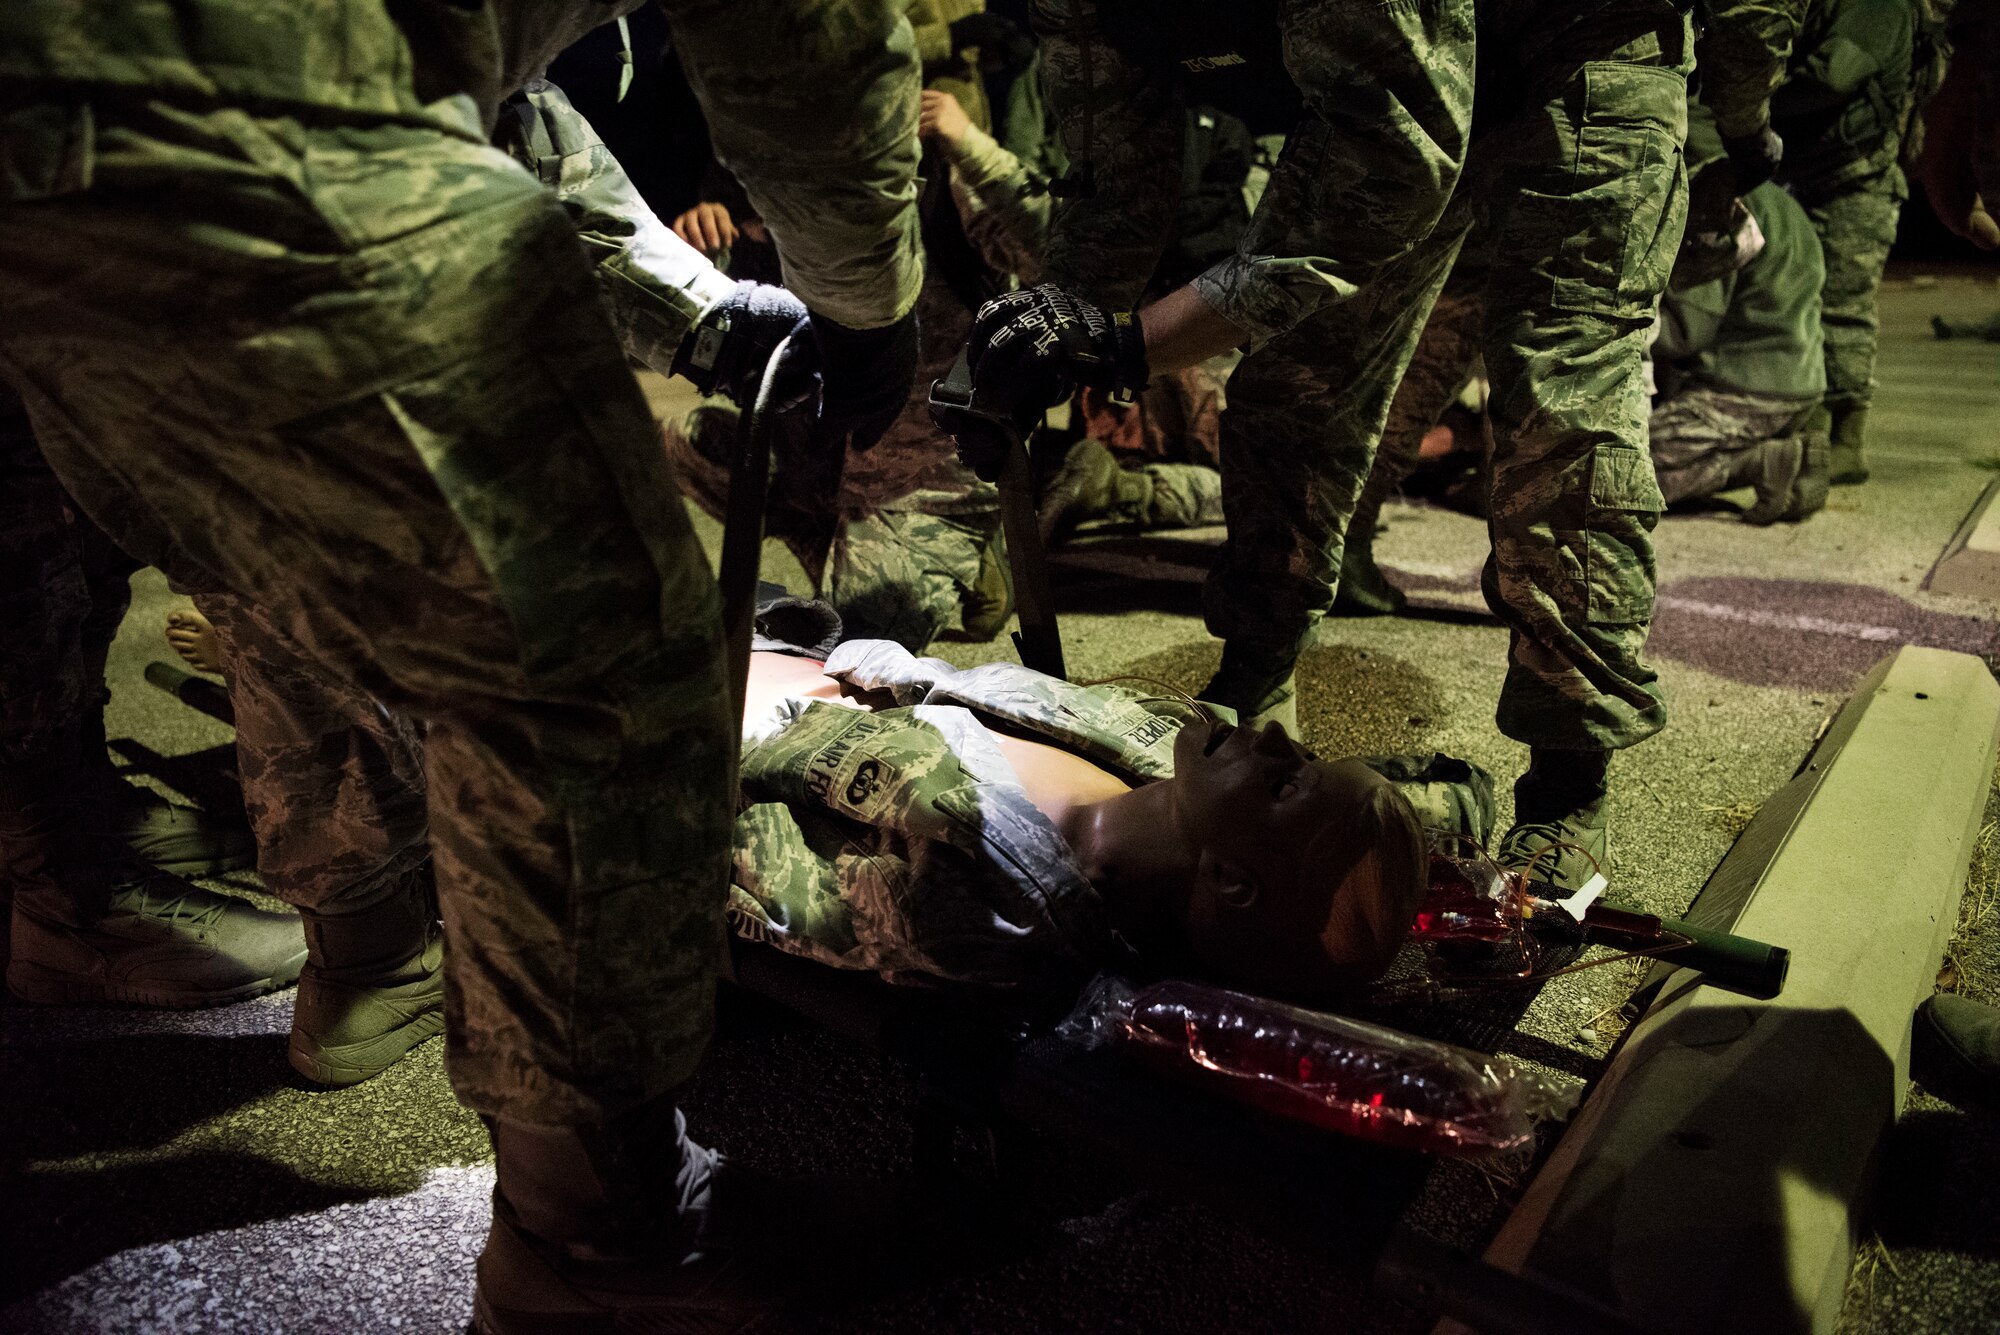 A team of Airmen assigned to the 47th Operational Medical Readiness Squadron strap down an individual for extract during a readiness training exercise at Laughlin Air Force Base, Texas, Oct. 25, 2019. Medical dummies were treated as real casualties while medics had to think critically and act quickly. (U.S. Air Force photo by Senior Airman Marco A. Gomez)